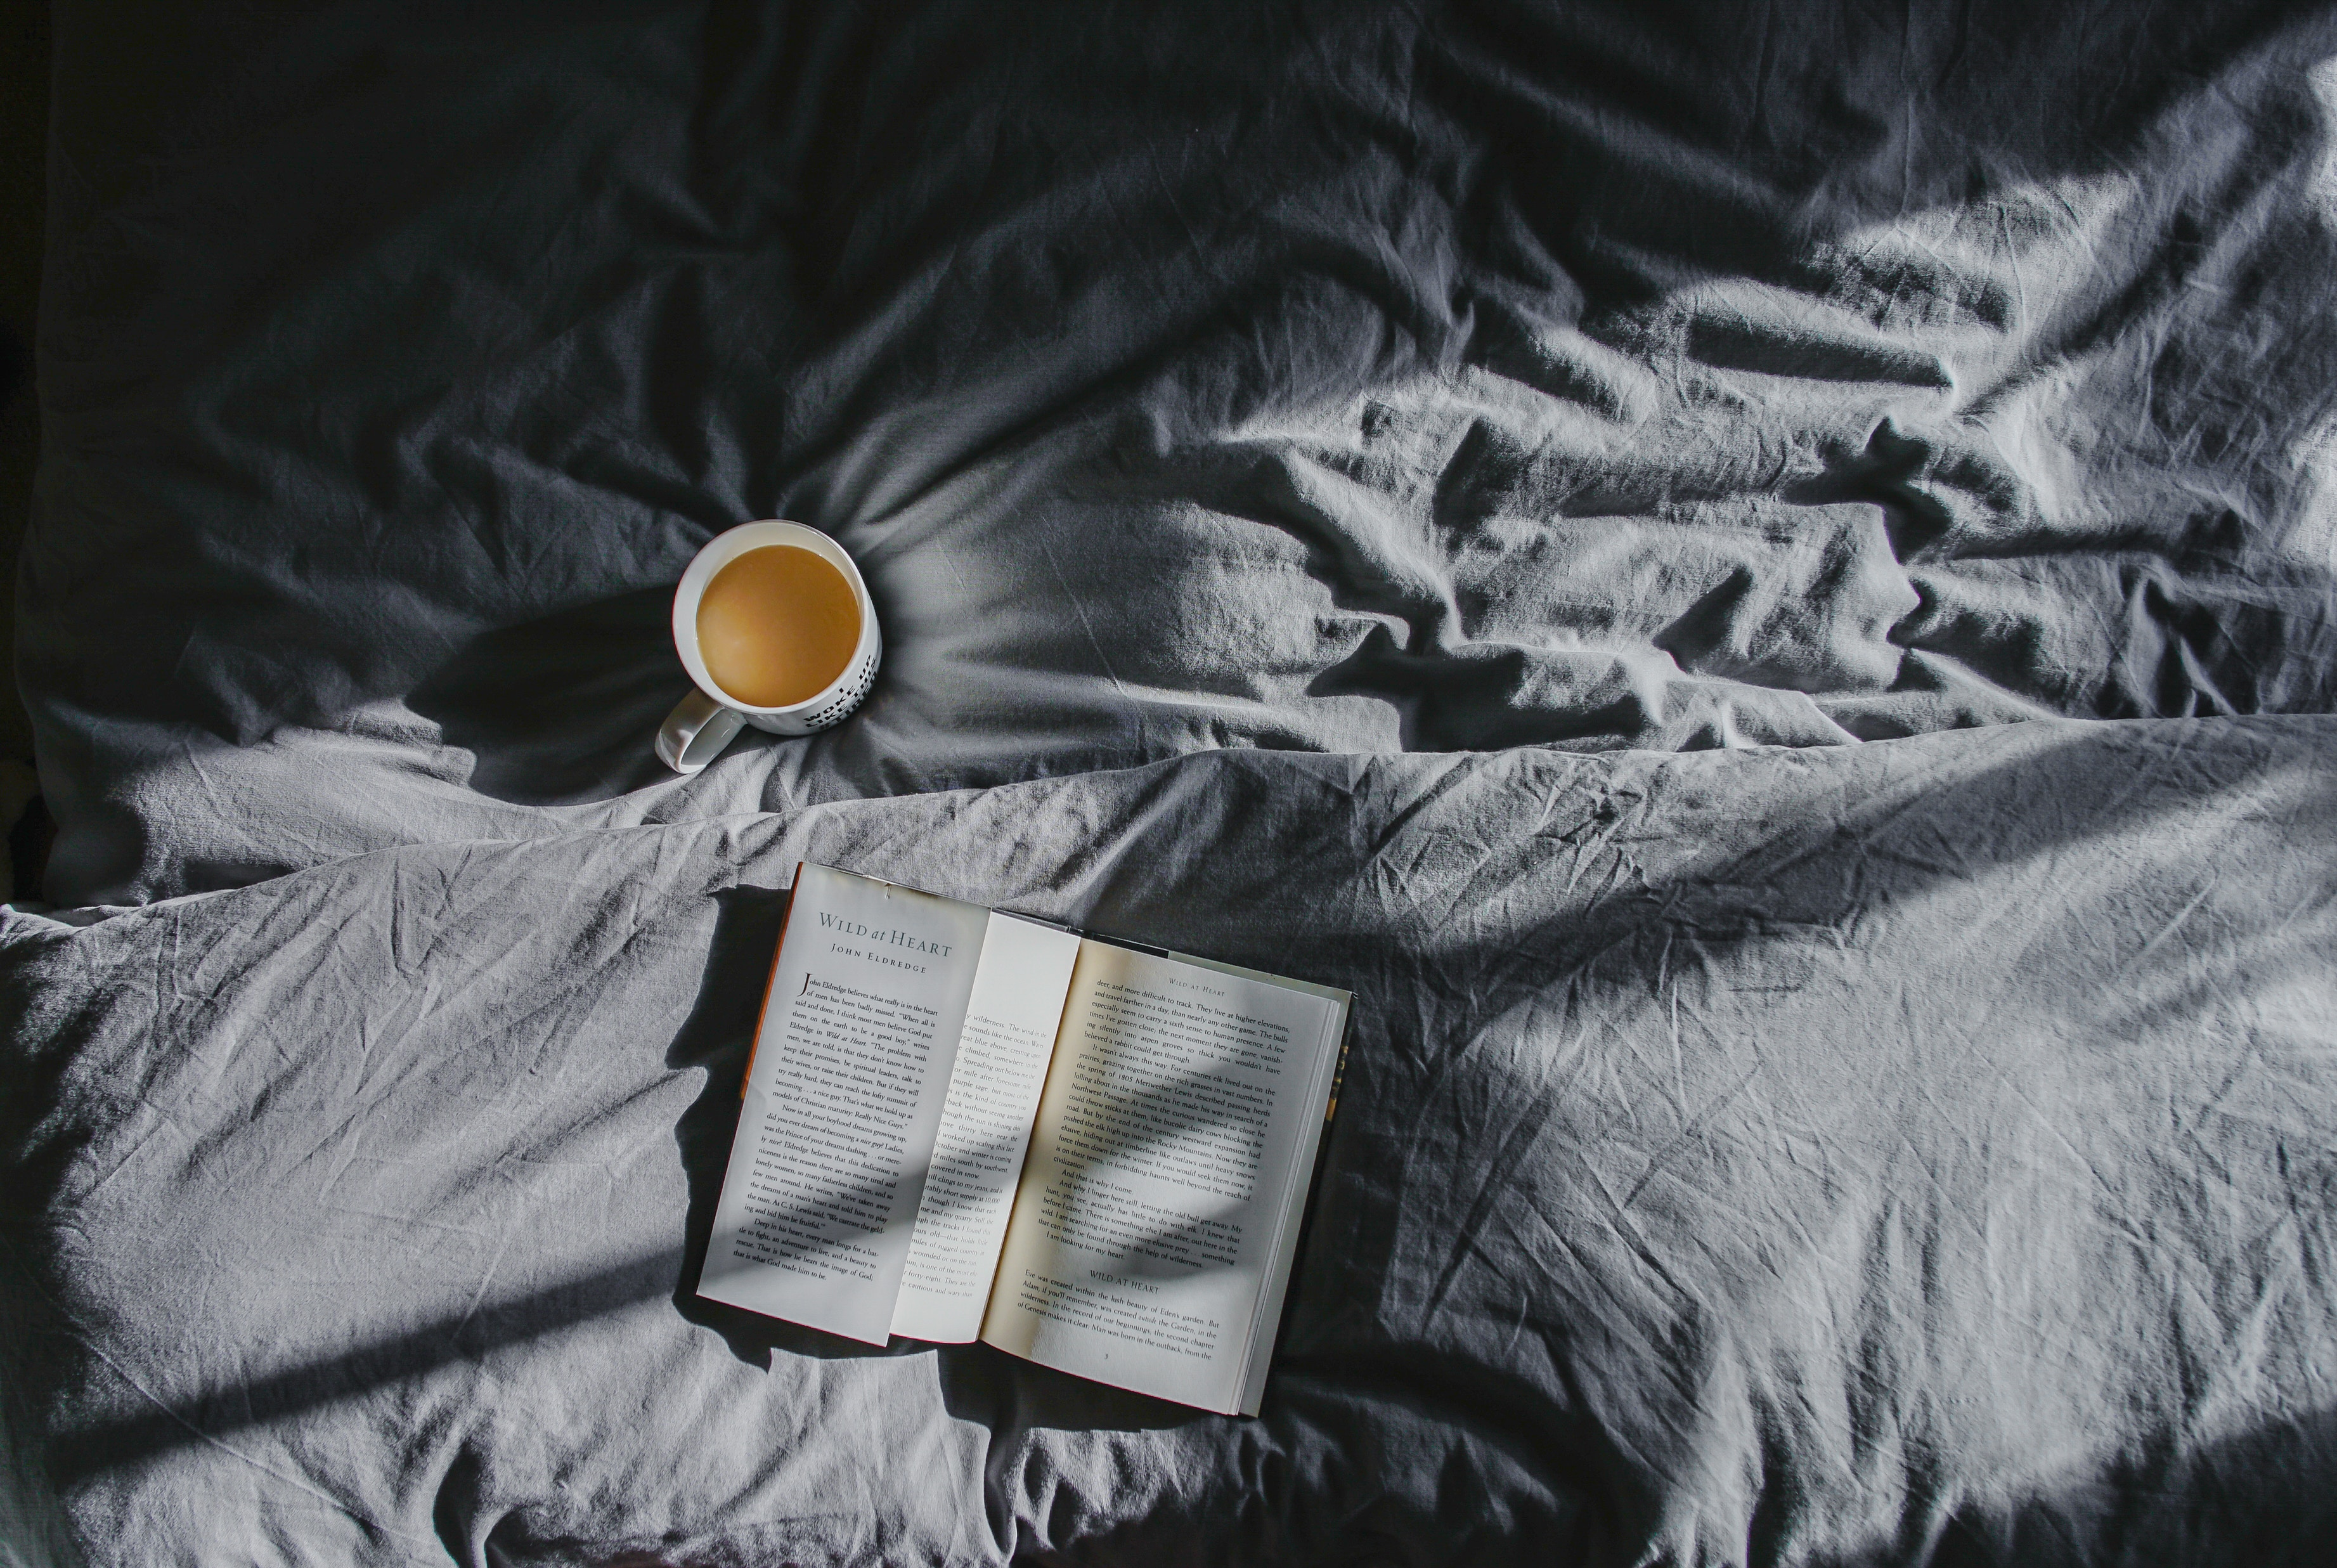 coffee, book, miscellaneous, bed Cell Phone Image